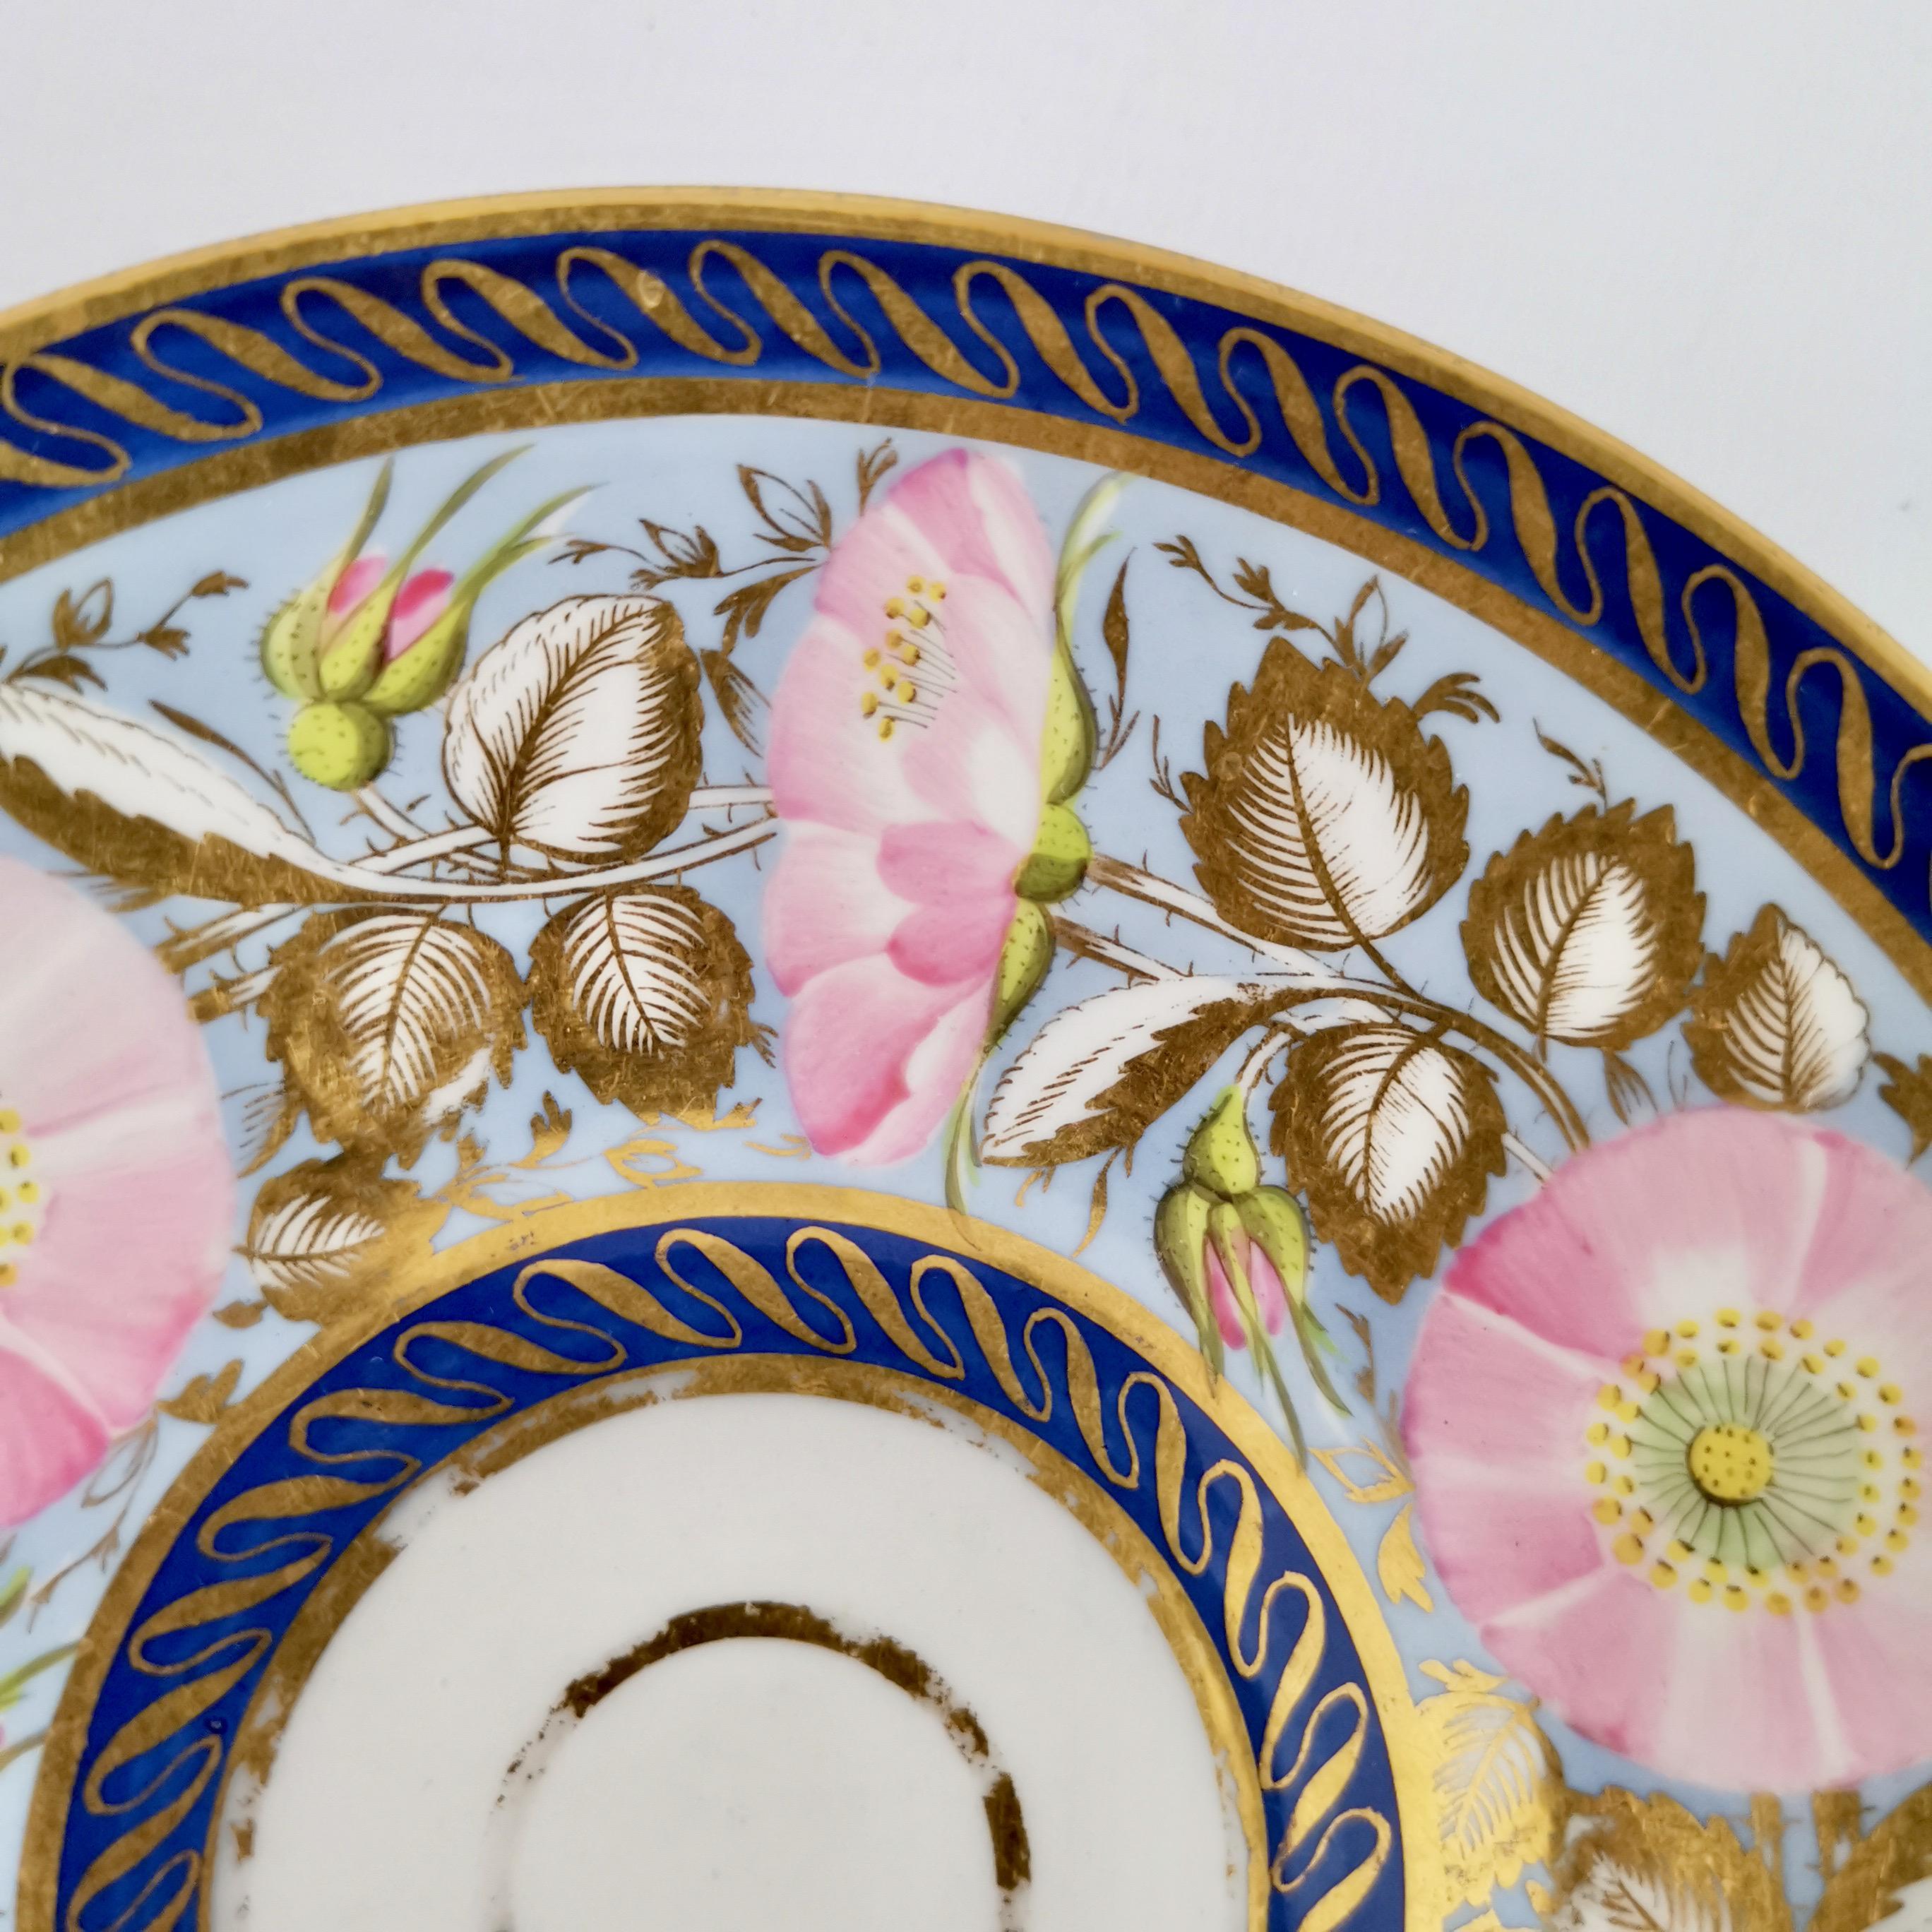 Anstice Horton & Rose Coffee Cup, Periwinkle and Pink Roses, Regency ca 1812 3